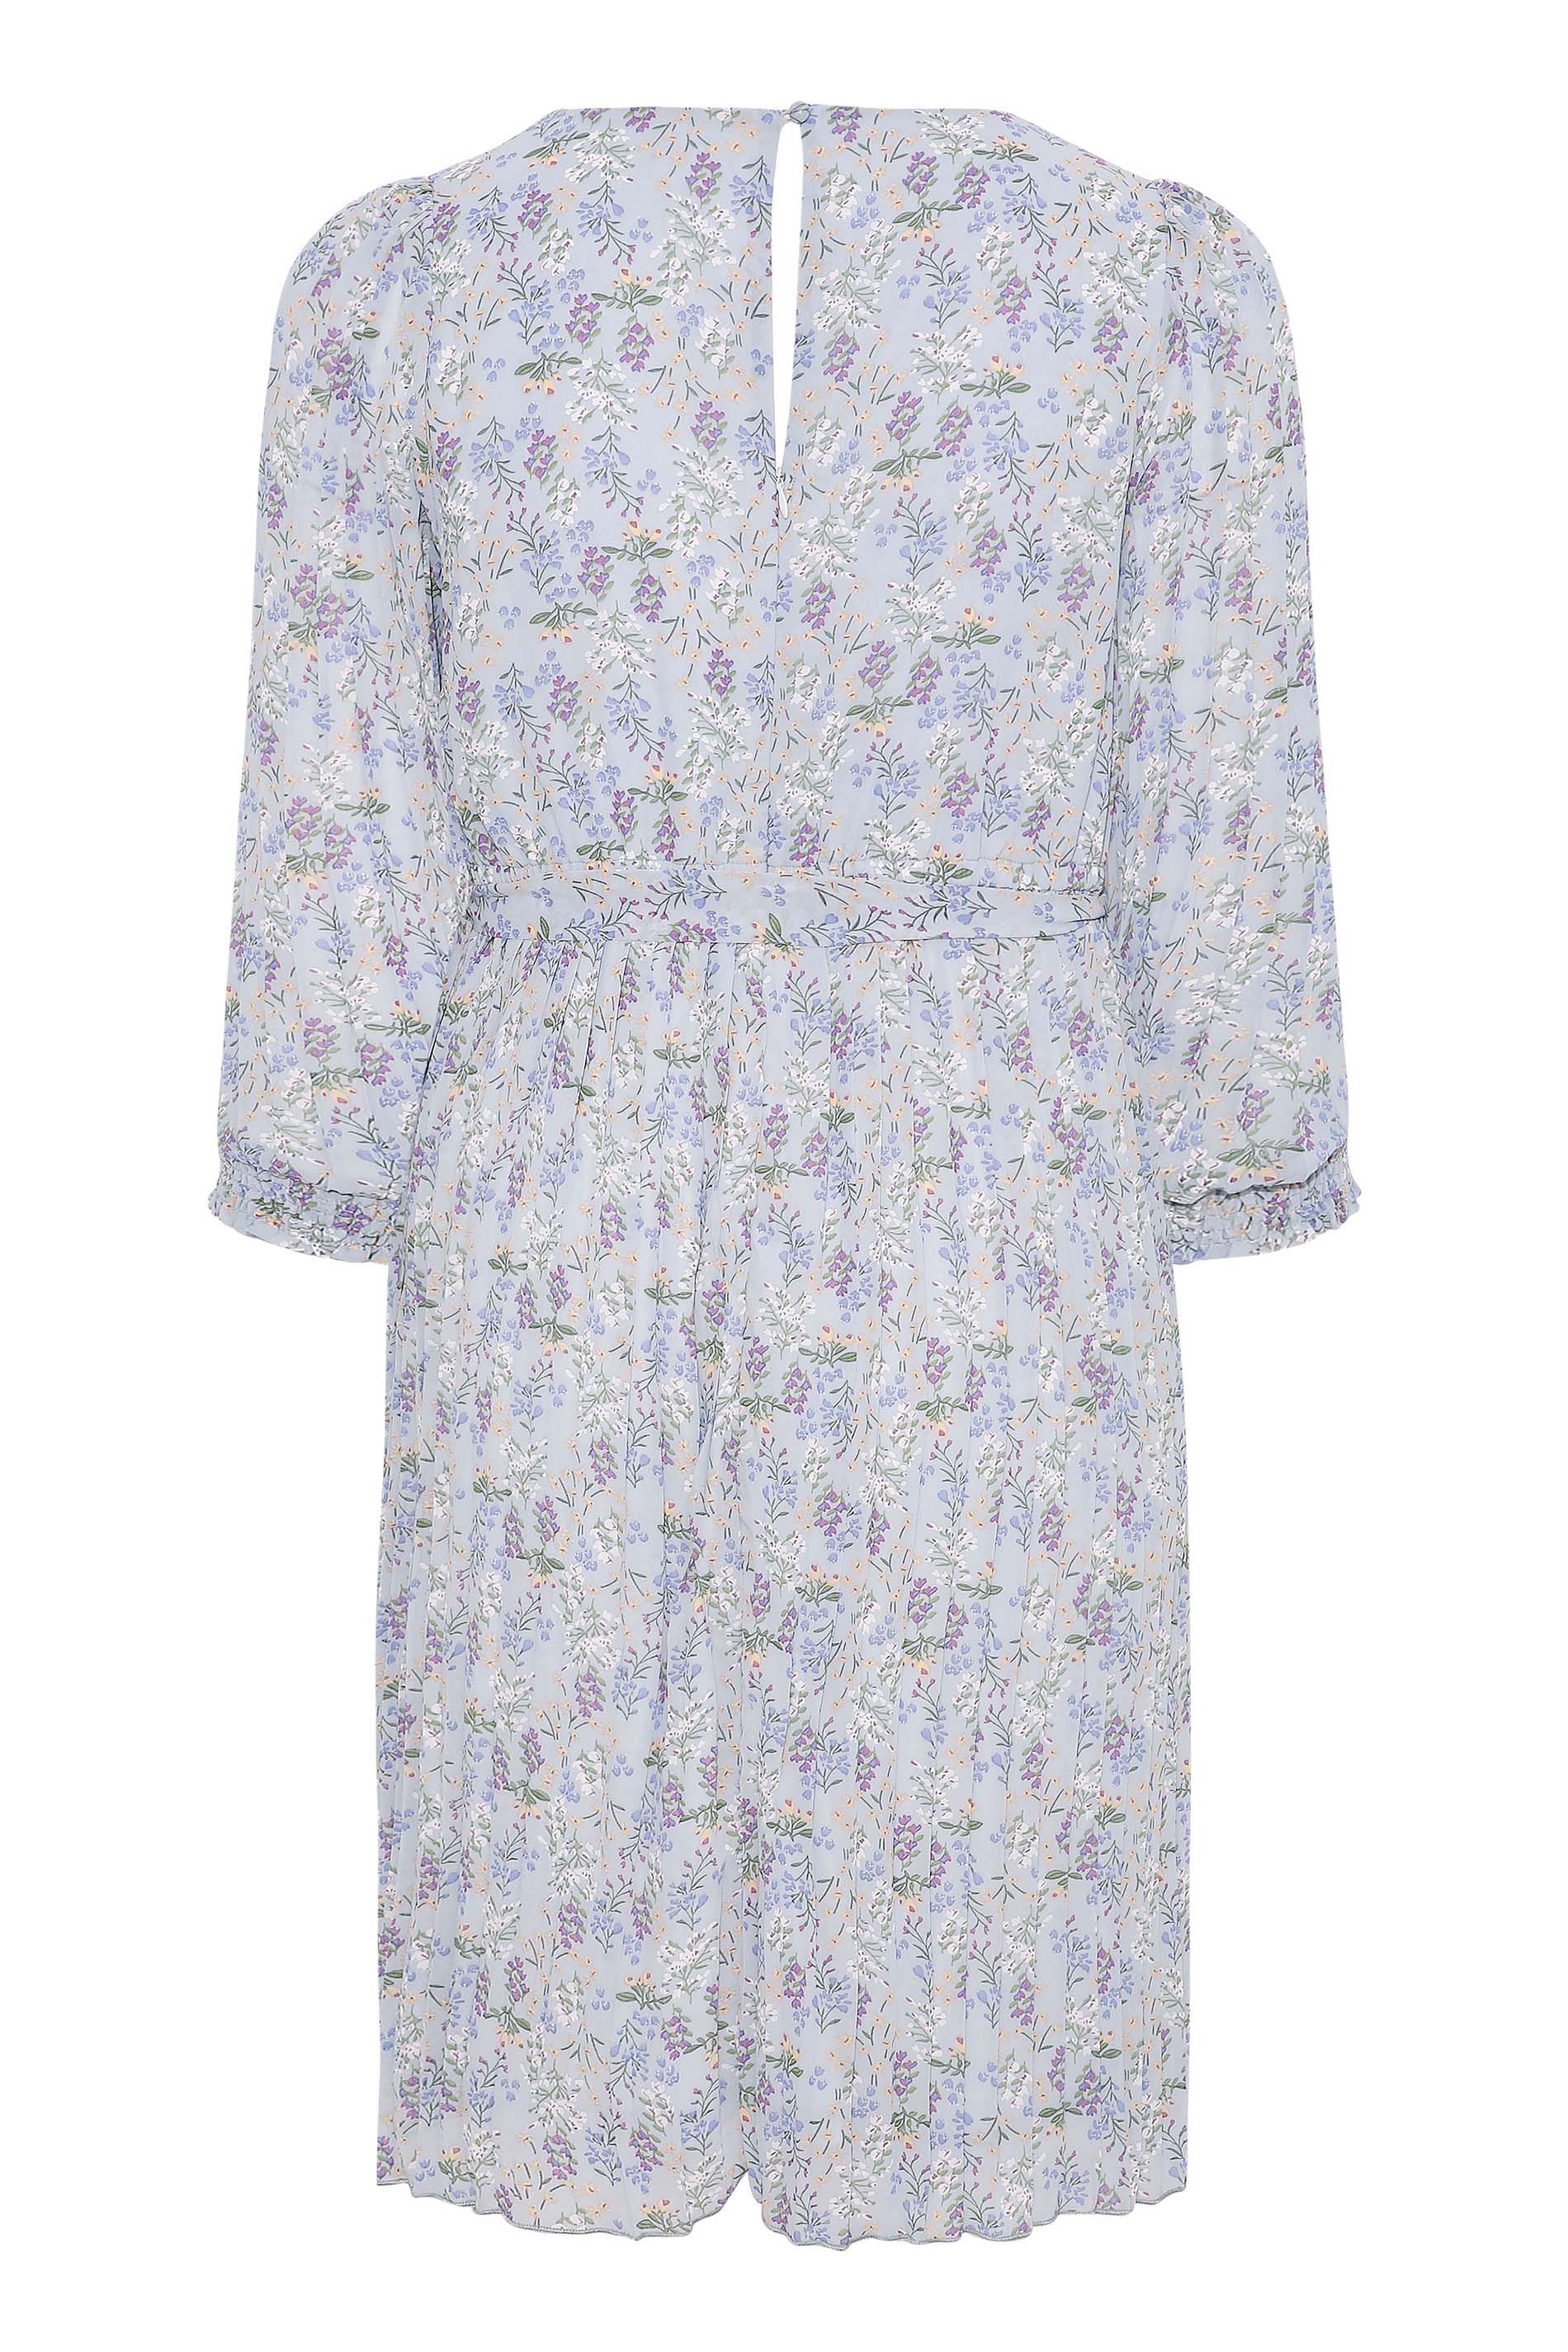 Robes Grande Taille Grande taille  Robes Occasions Spéciales | YOURS LONDON - Robe Bleue Pastel Design Cache-Coeur Floral - PA92507